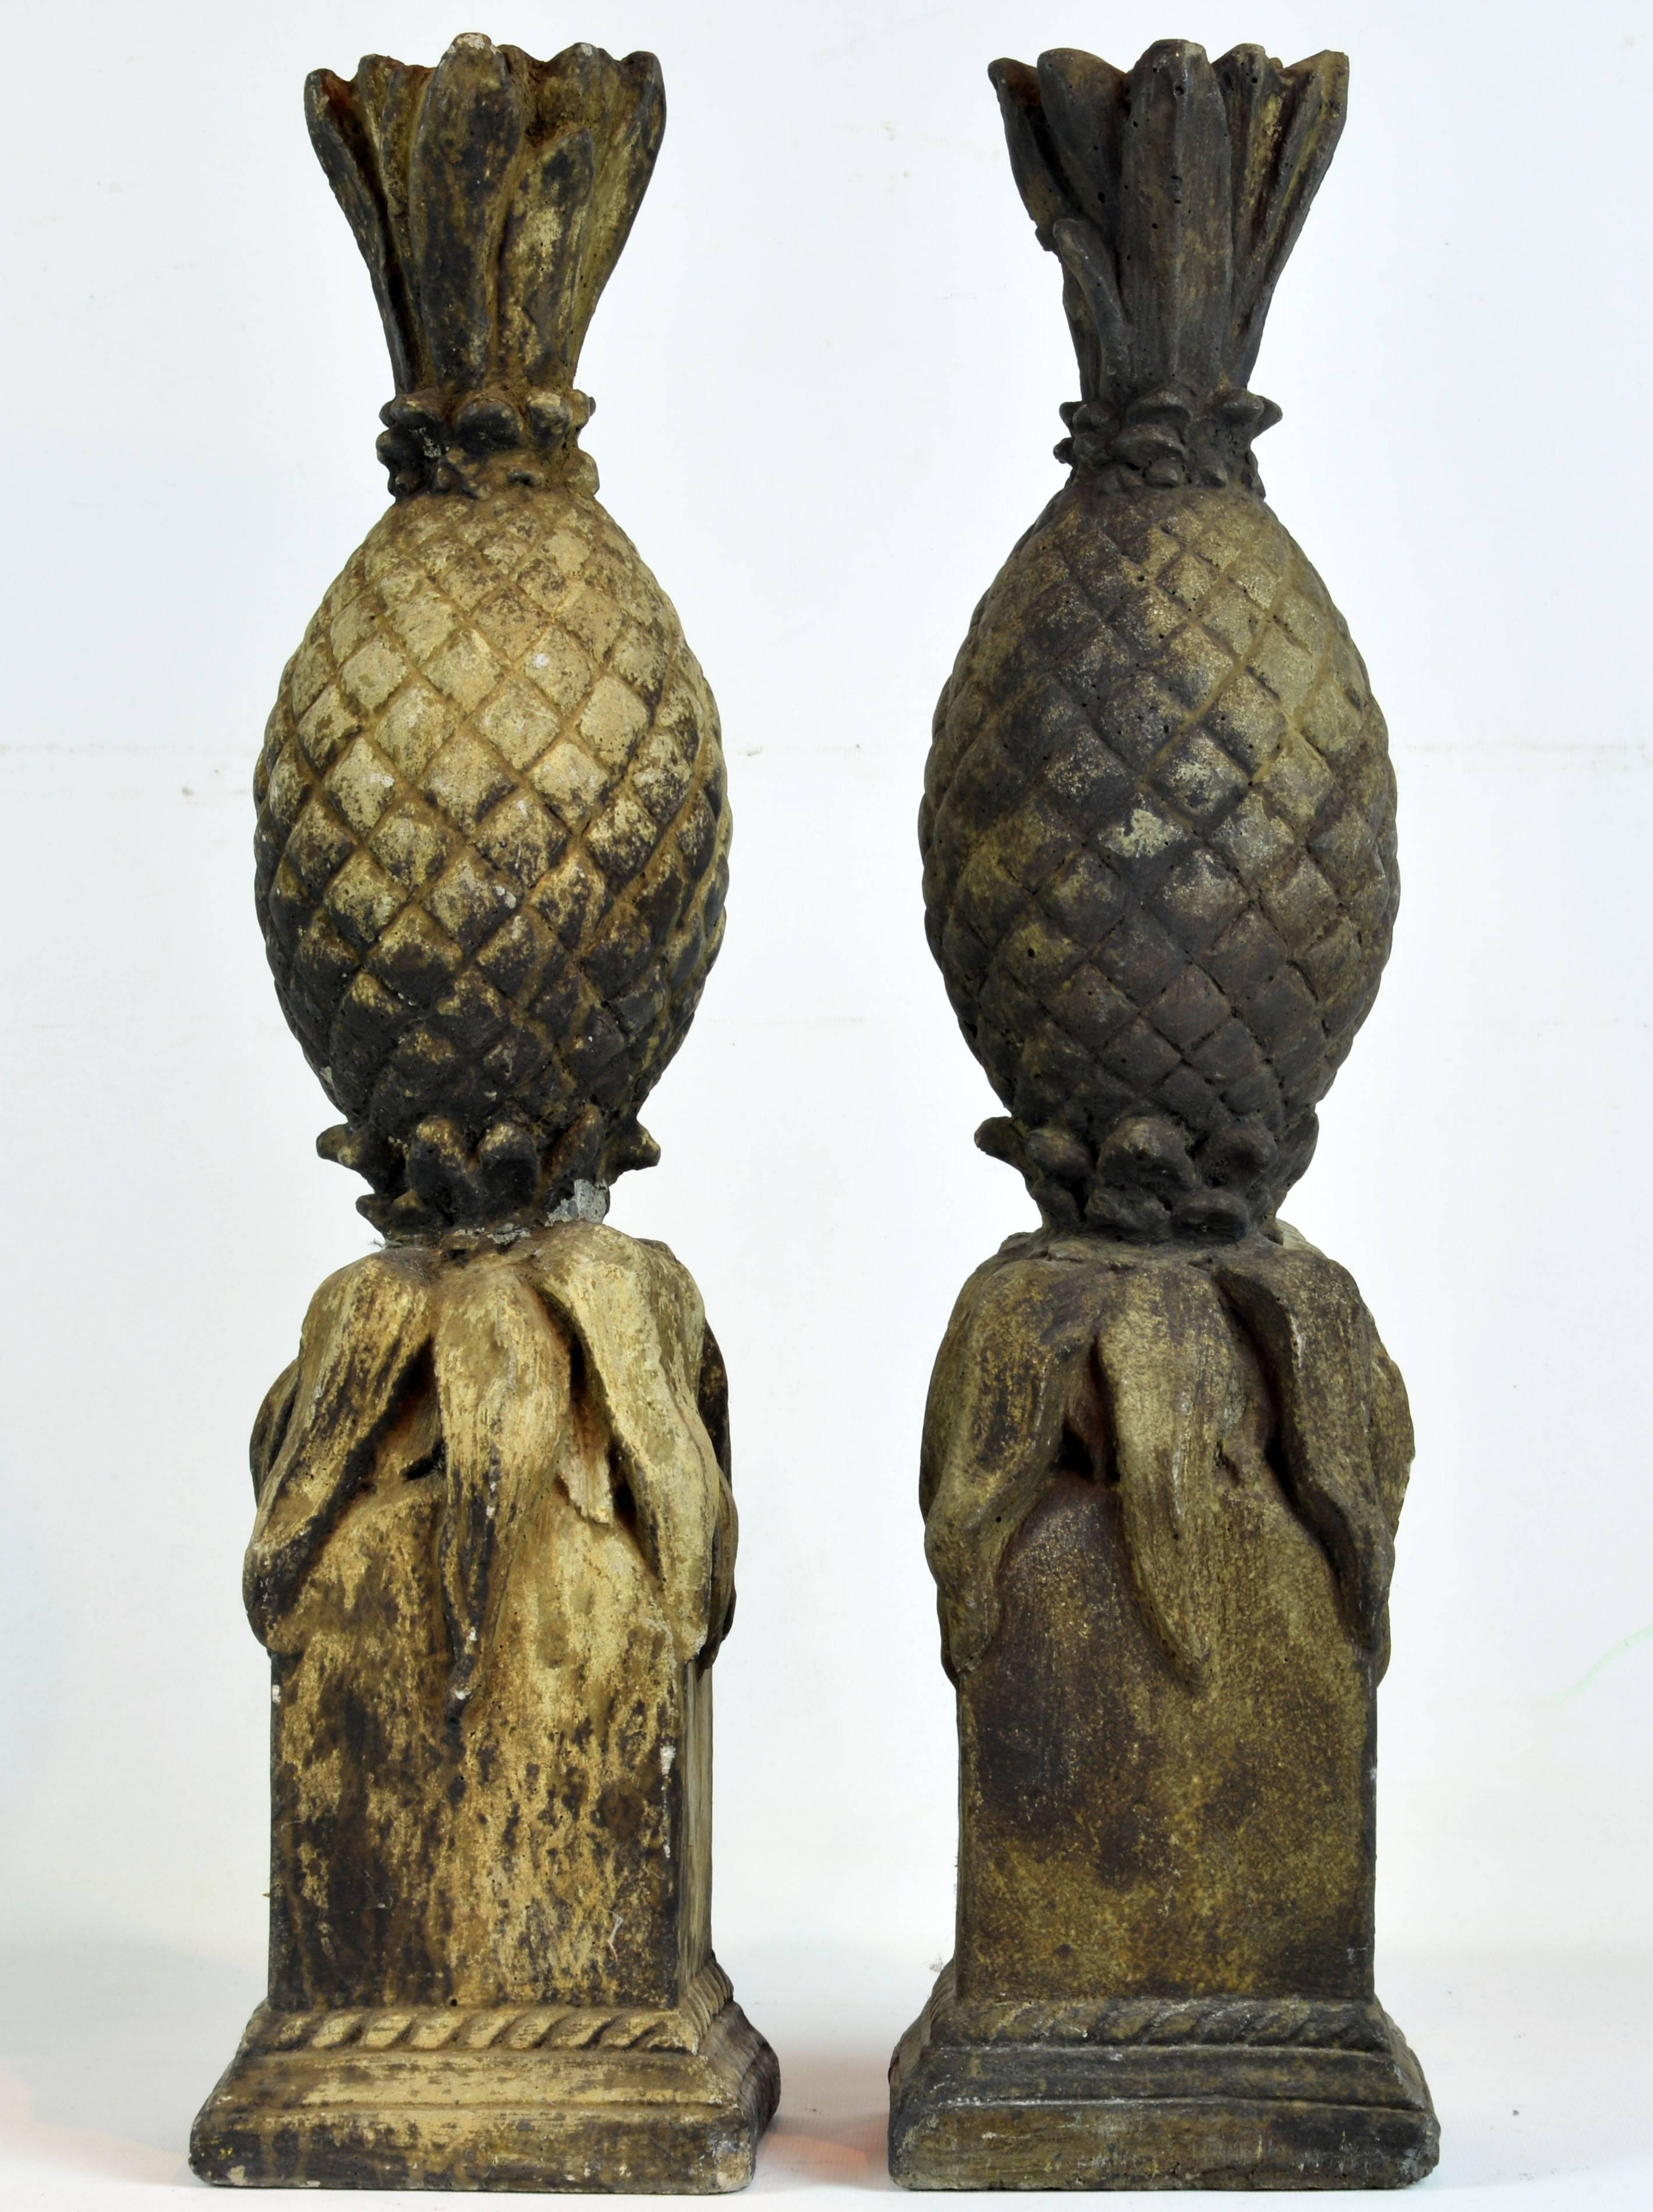 English Pair of 19th Century Weathered Cast Stone Figures of Pineapples on Square Bases